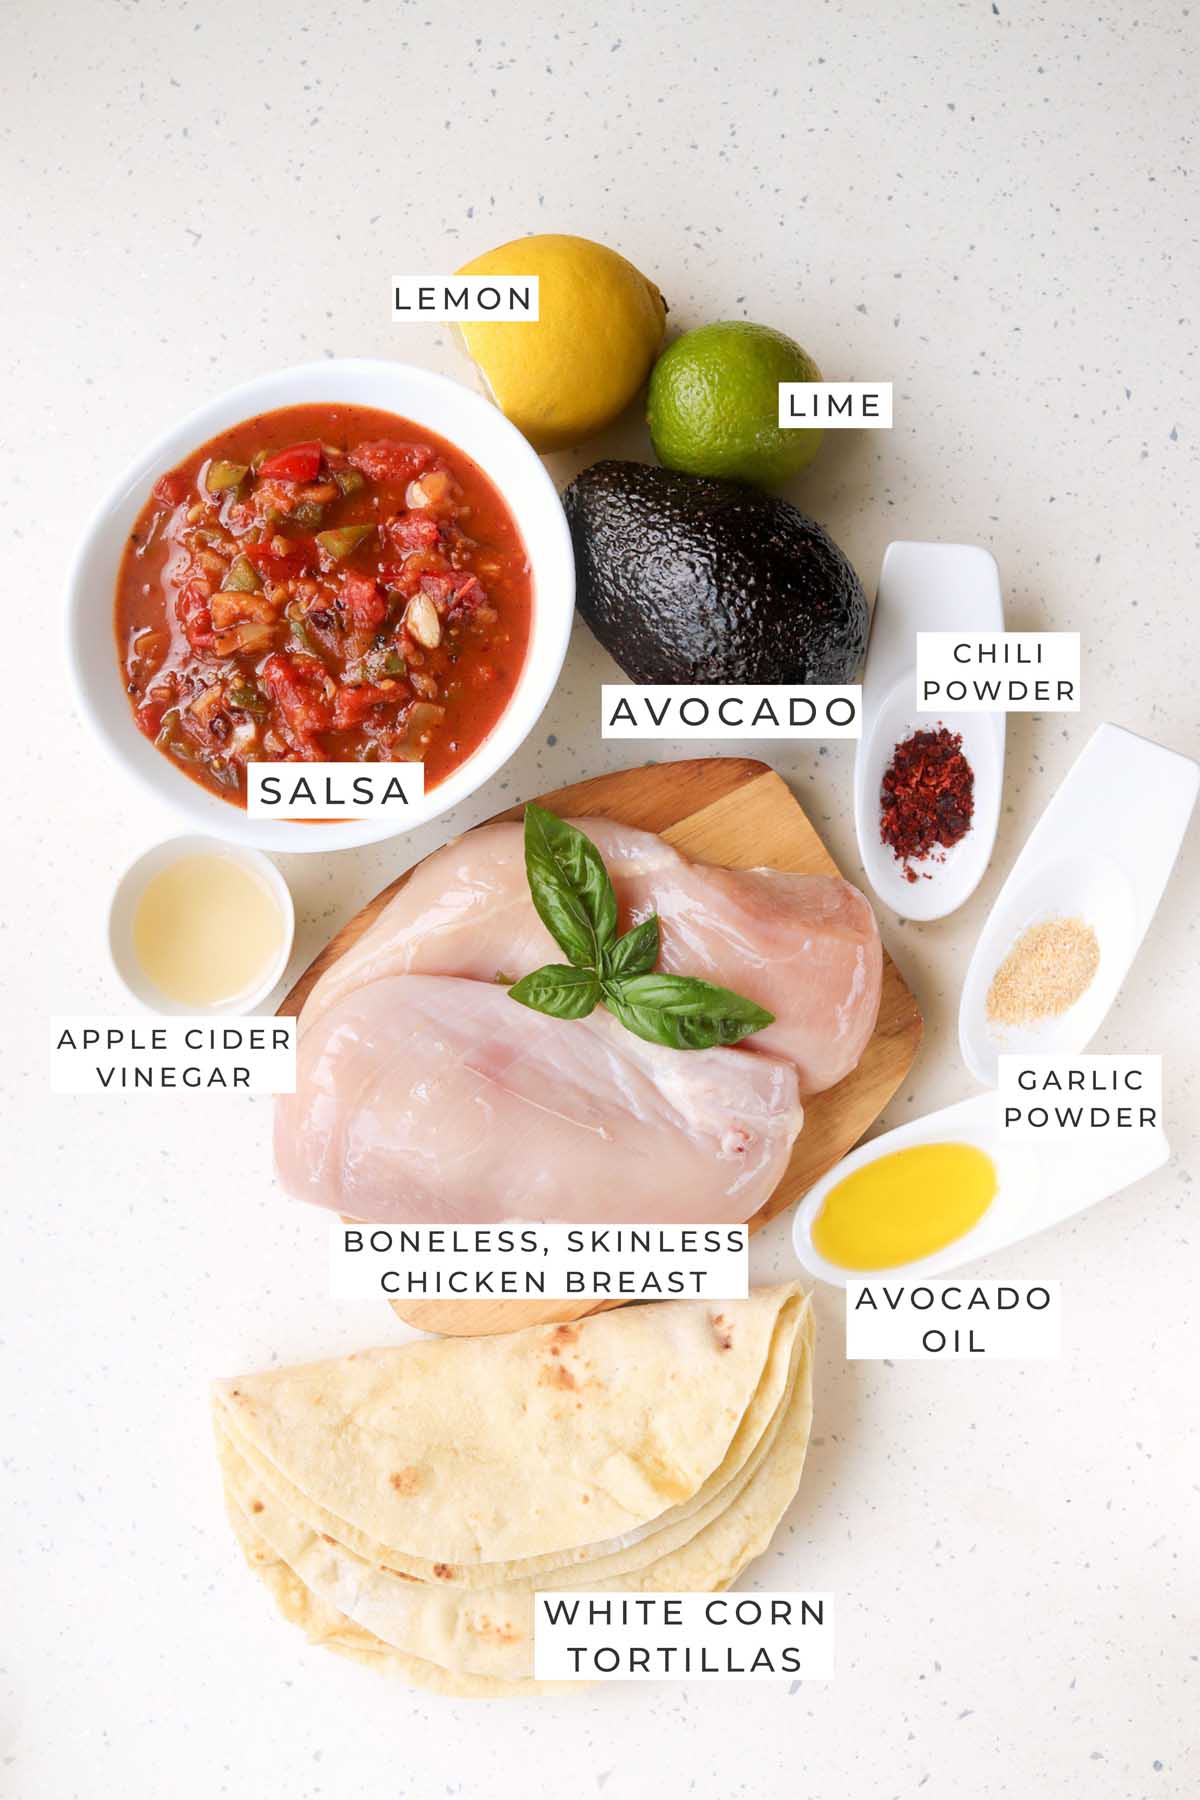 Labeled ingredients for the chicken tacos.